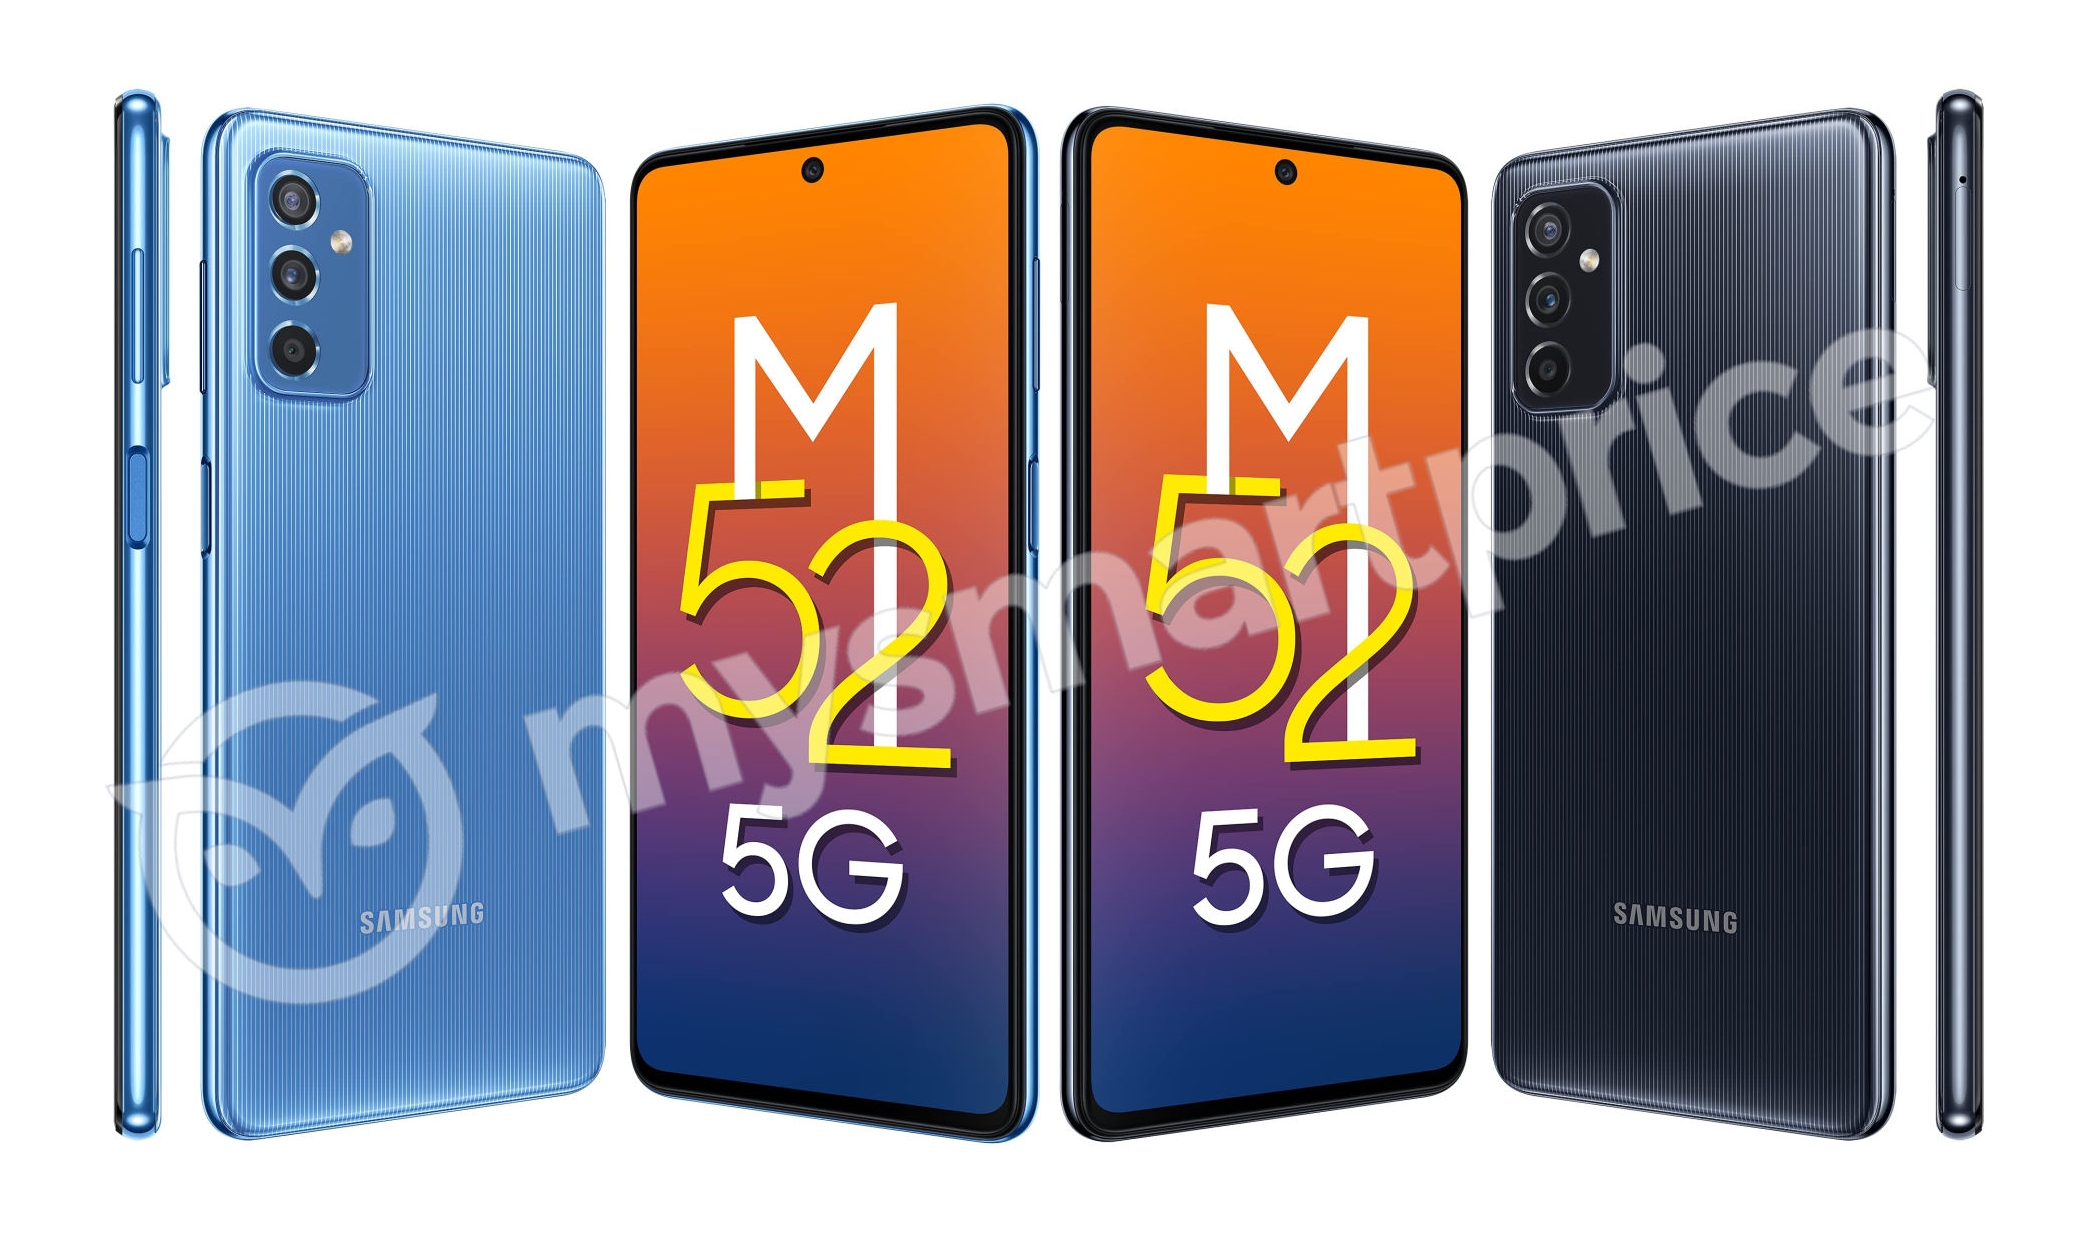 An insider has shown what the Samsung Galaxy M52 5G will look like: a smartphone with a 120Hz screen, triple camera and Snapdragon 778G chip